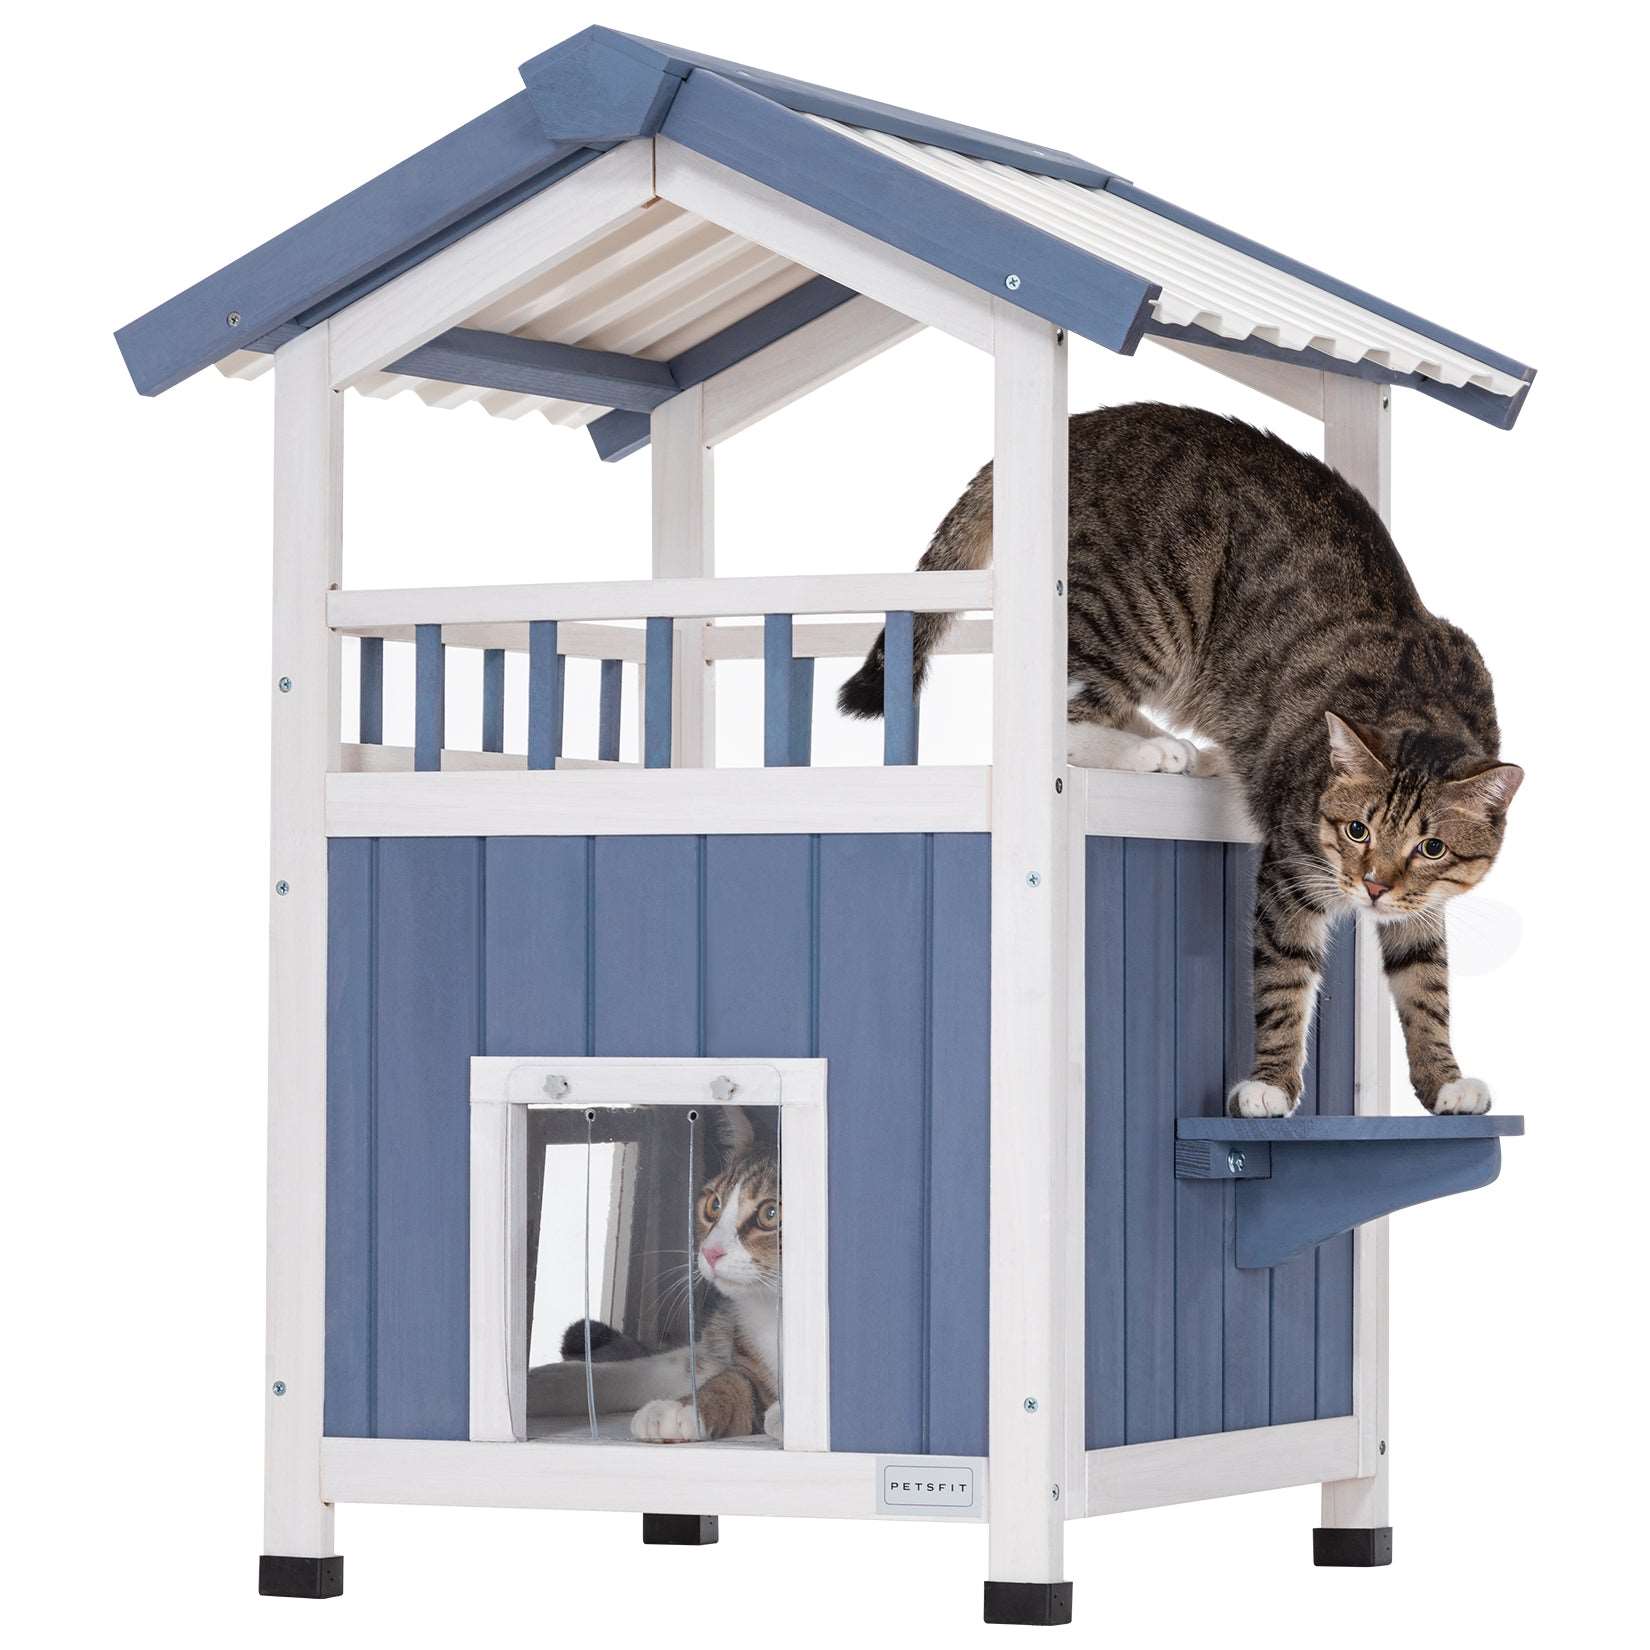 https://petsfit.com/products/petsfit-outside-wooden-cat-house-pvc-roof-door-with-curtain-escape-door-07